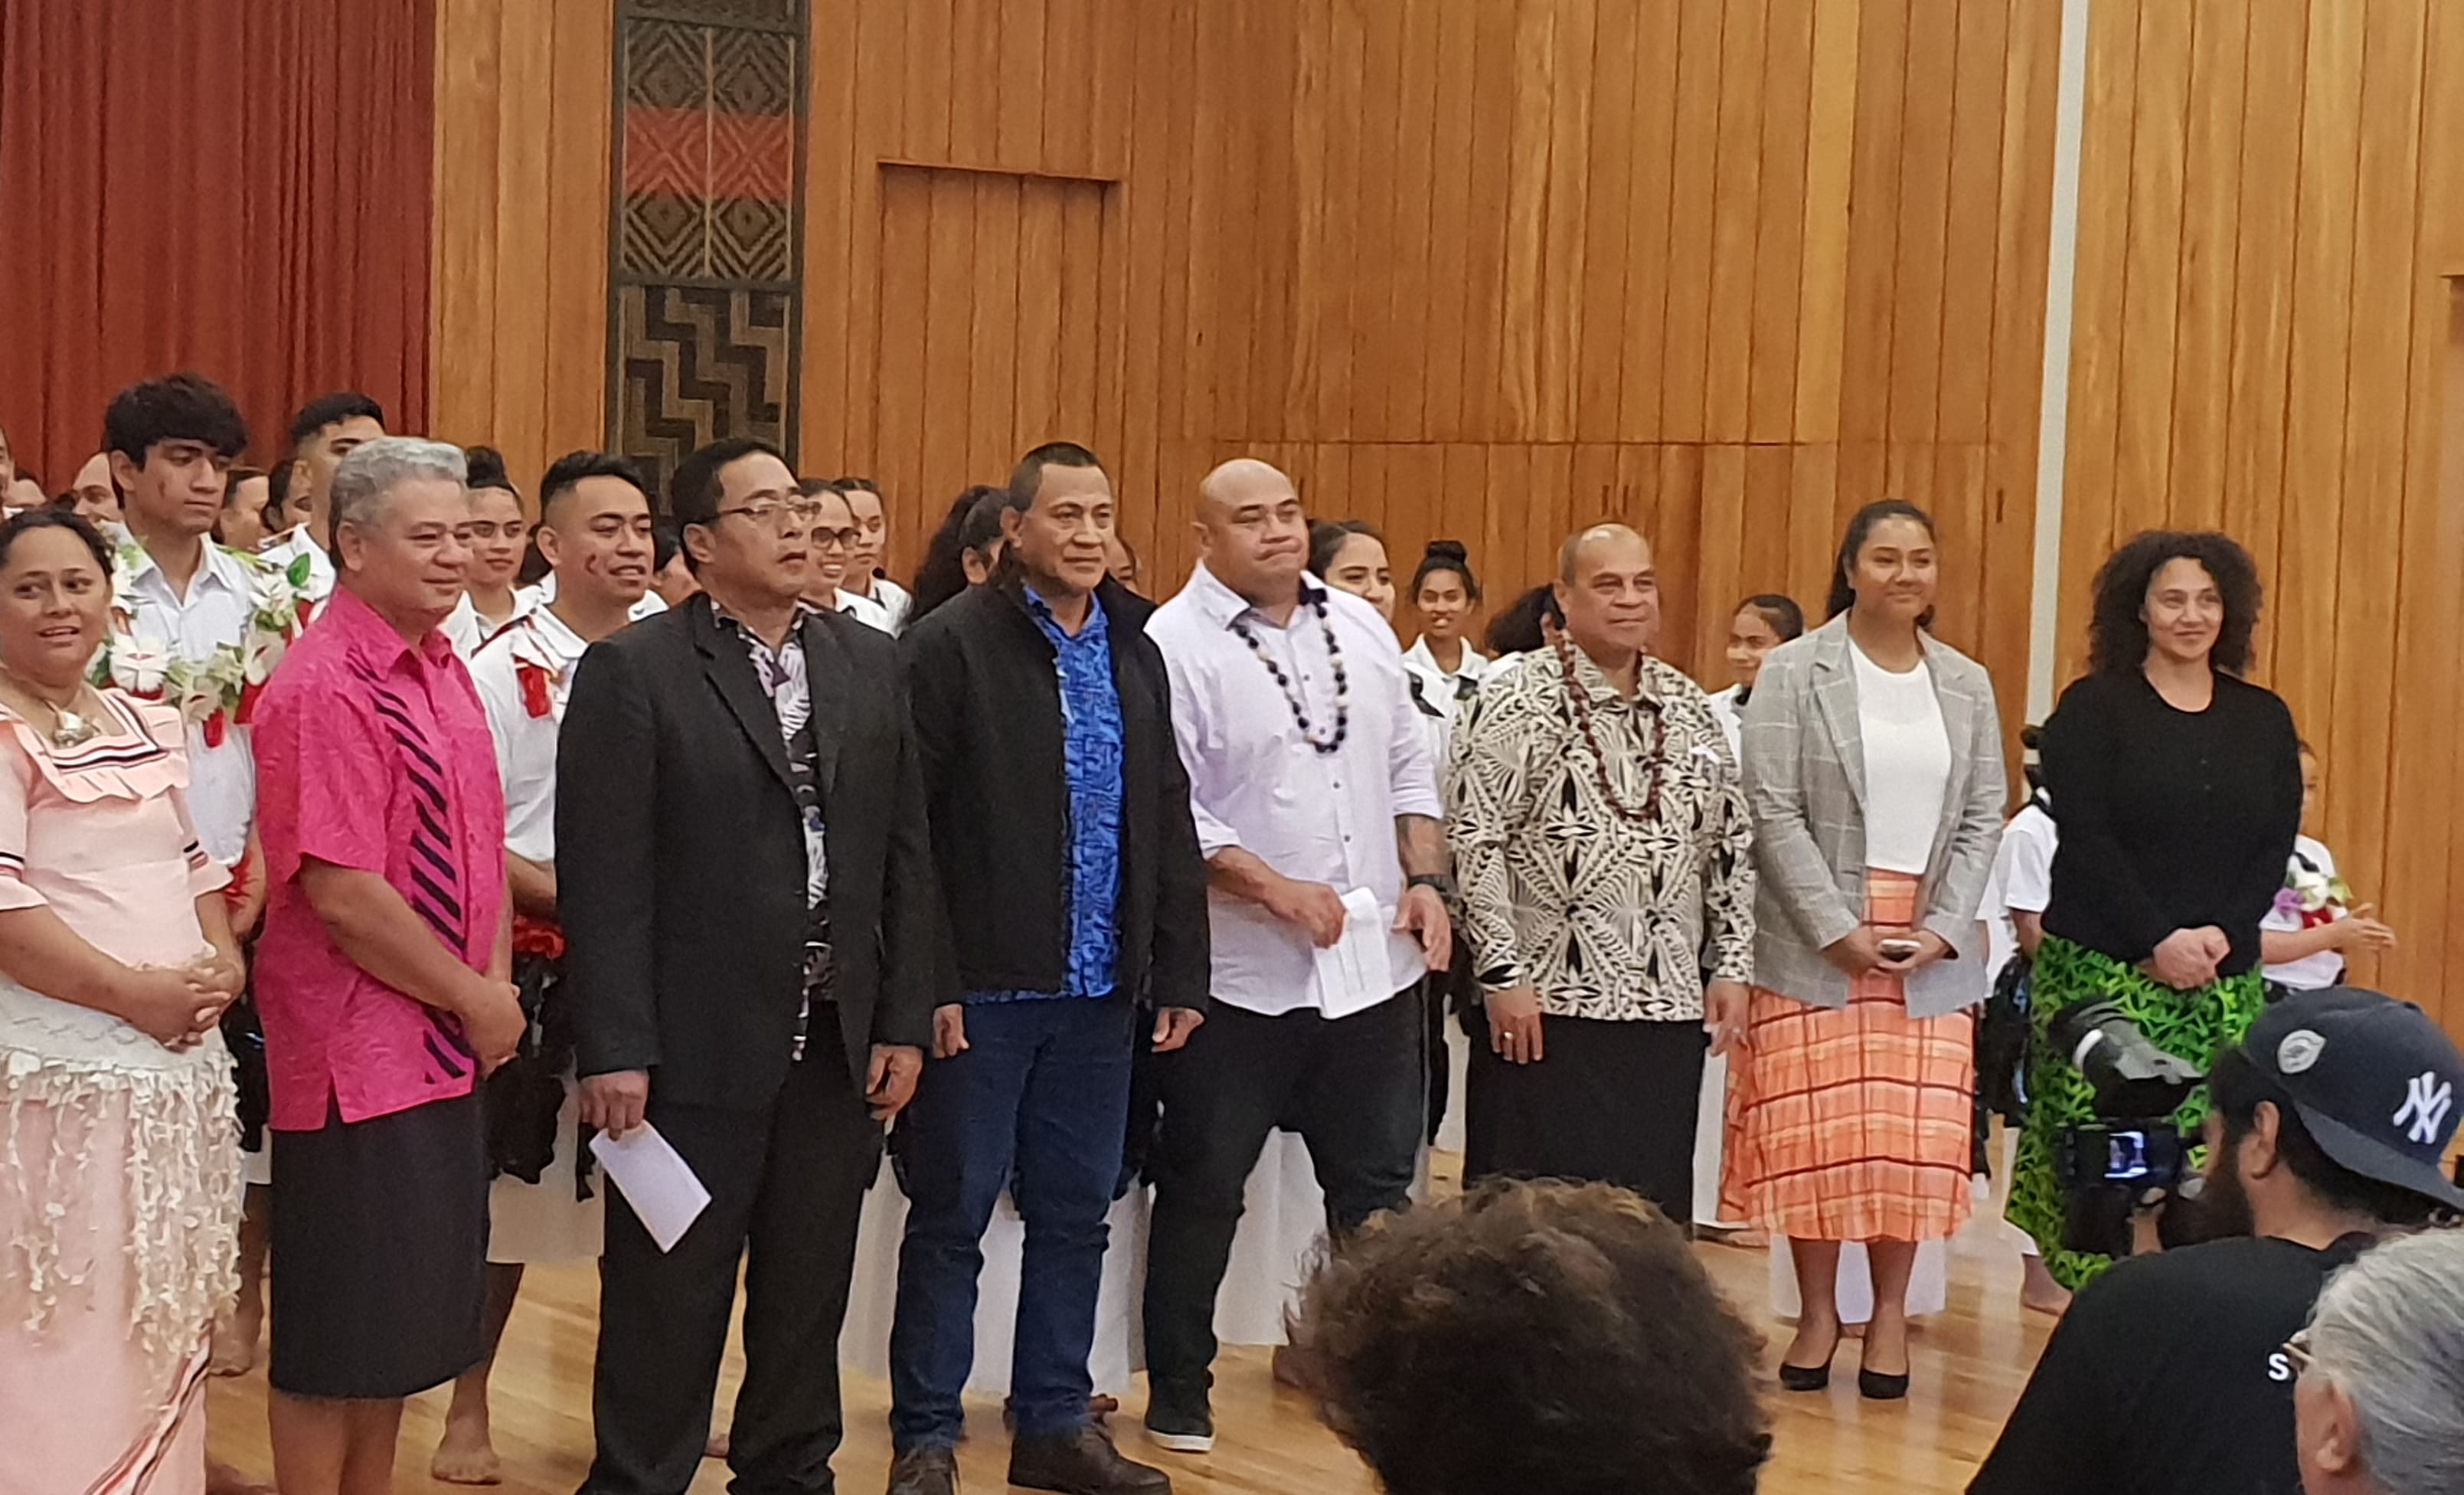 Guests from left, Agatha Ferei, her husband and Fiji Rotuman group chair Pasirio Fuirivai; Gagaj (chief) Tomanov; Pastor George Aptinko; NZ Rotuma group chair Gabe Penjueli; Minister Aupito William Sio; Youth MP for Mangere 'Alakihihifo Vailala; and TV producer Ngaire Fuata.